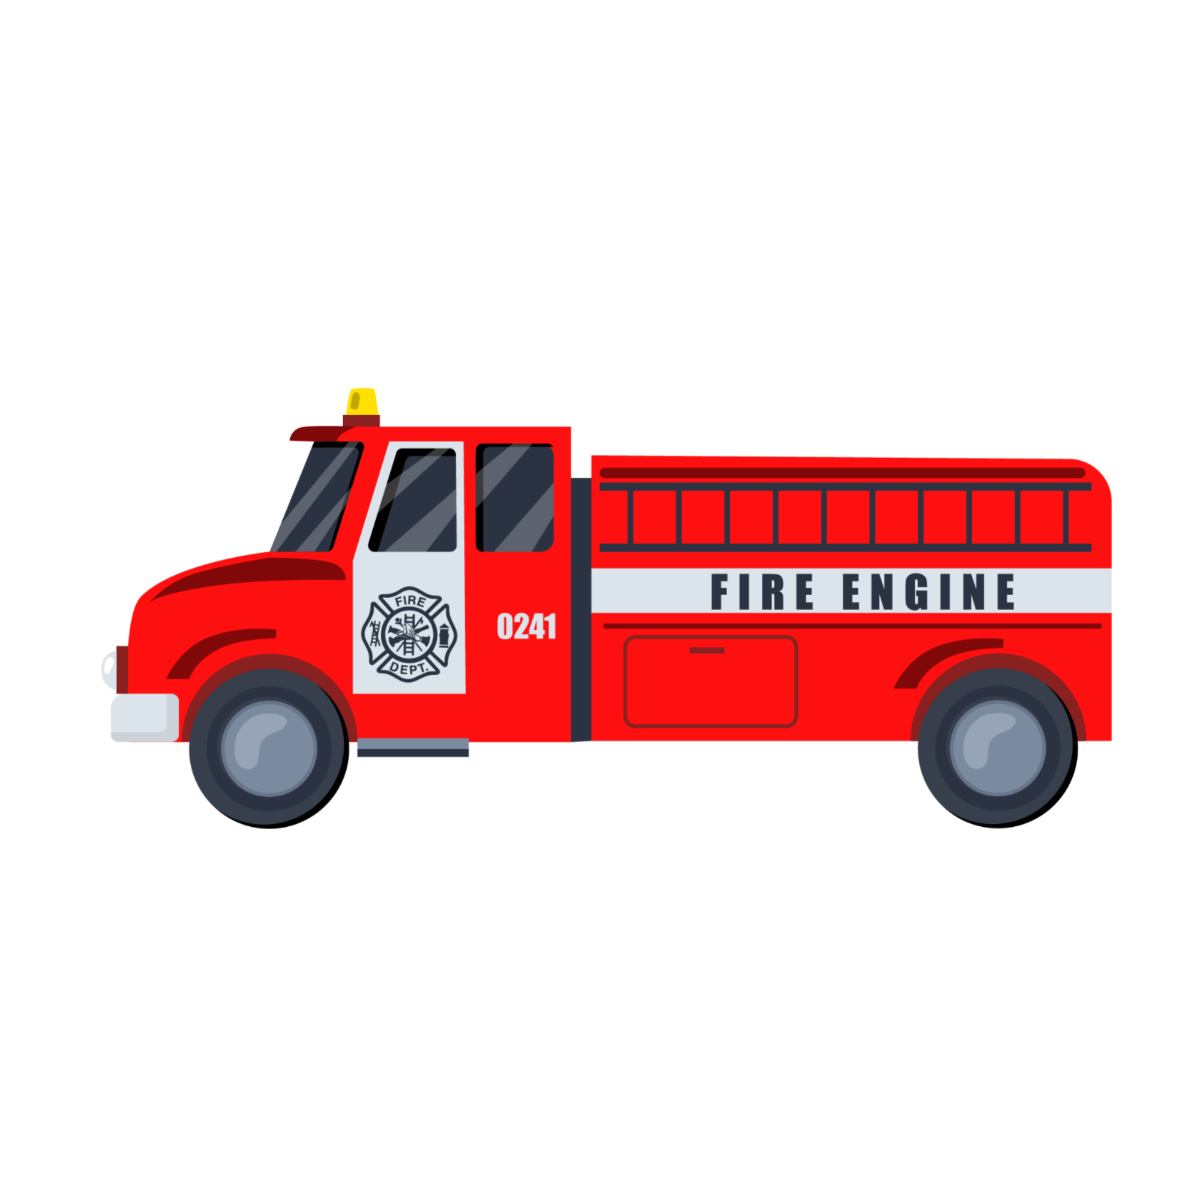 Fire Engine Vector Template